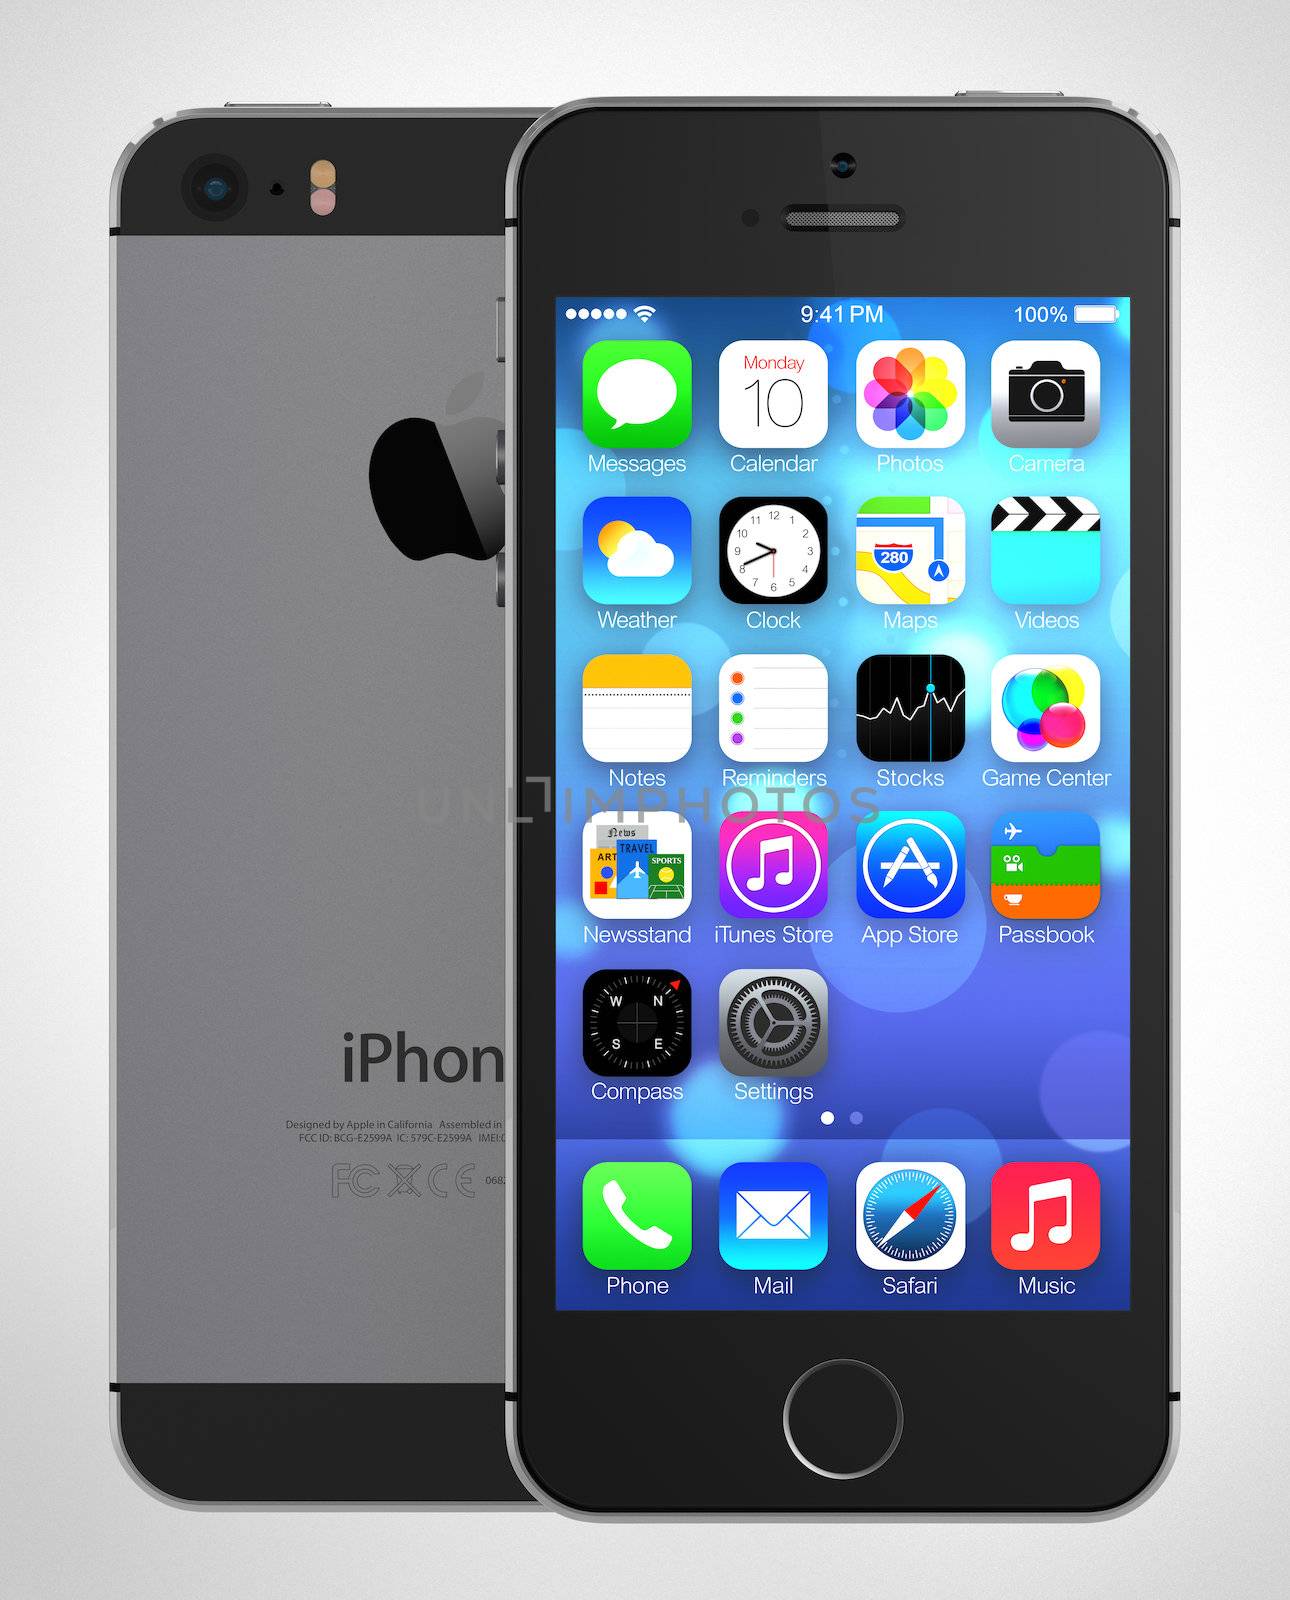 Apple iPhone 5s by manaemedia